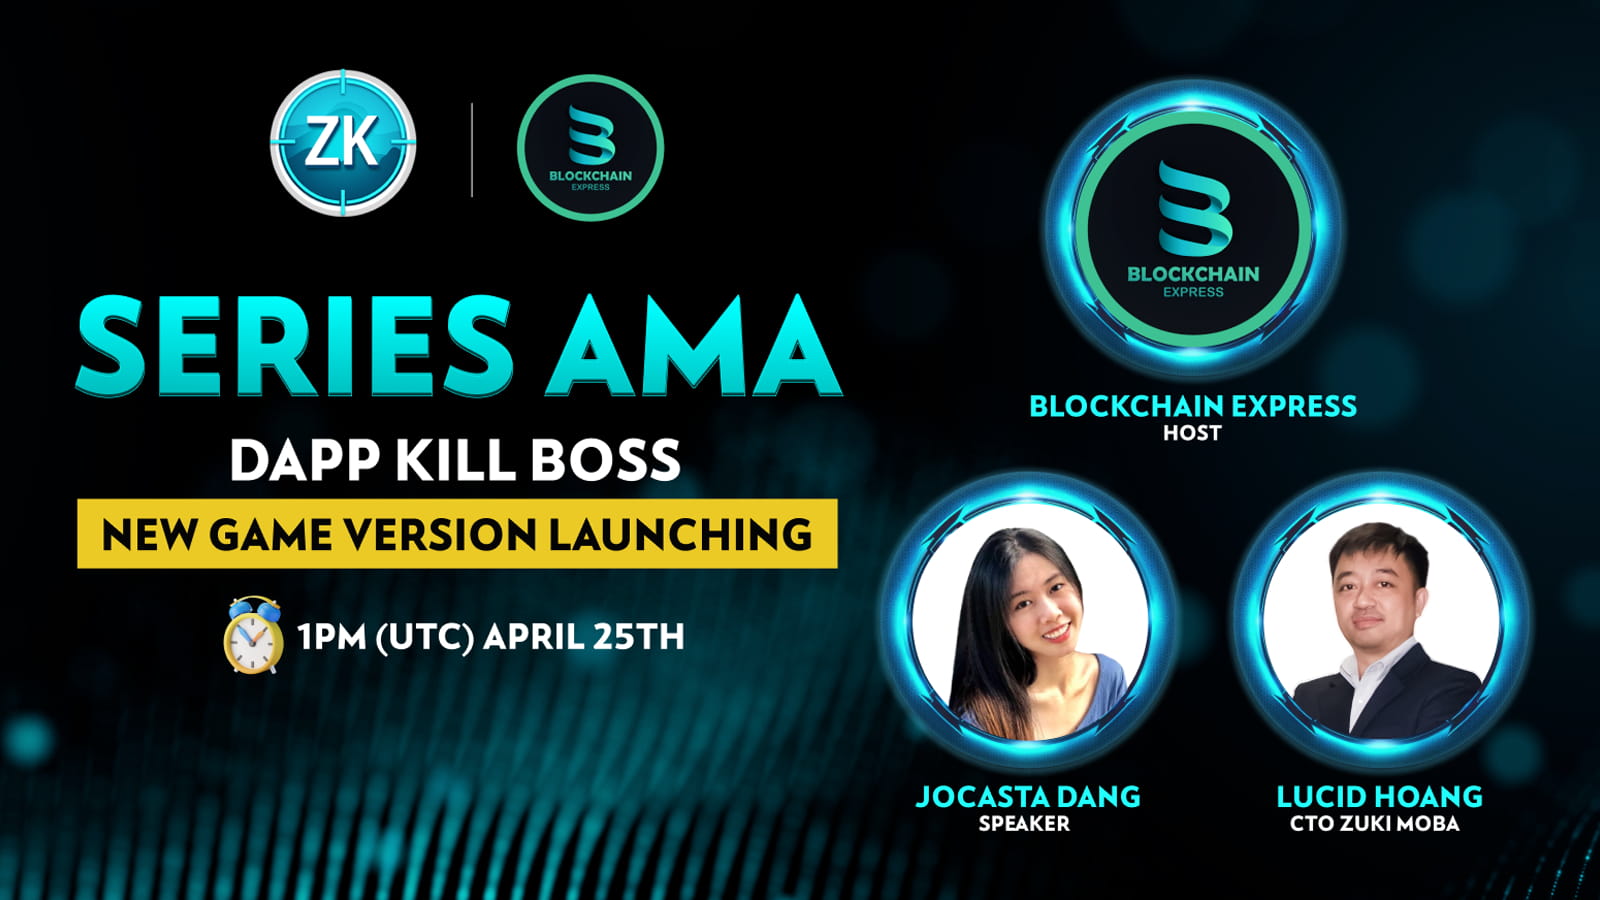 ₿lockchain Express will be hosting an AMA session with" Zuki Moba "